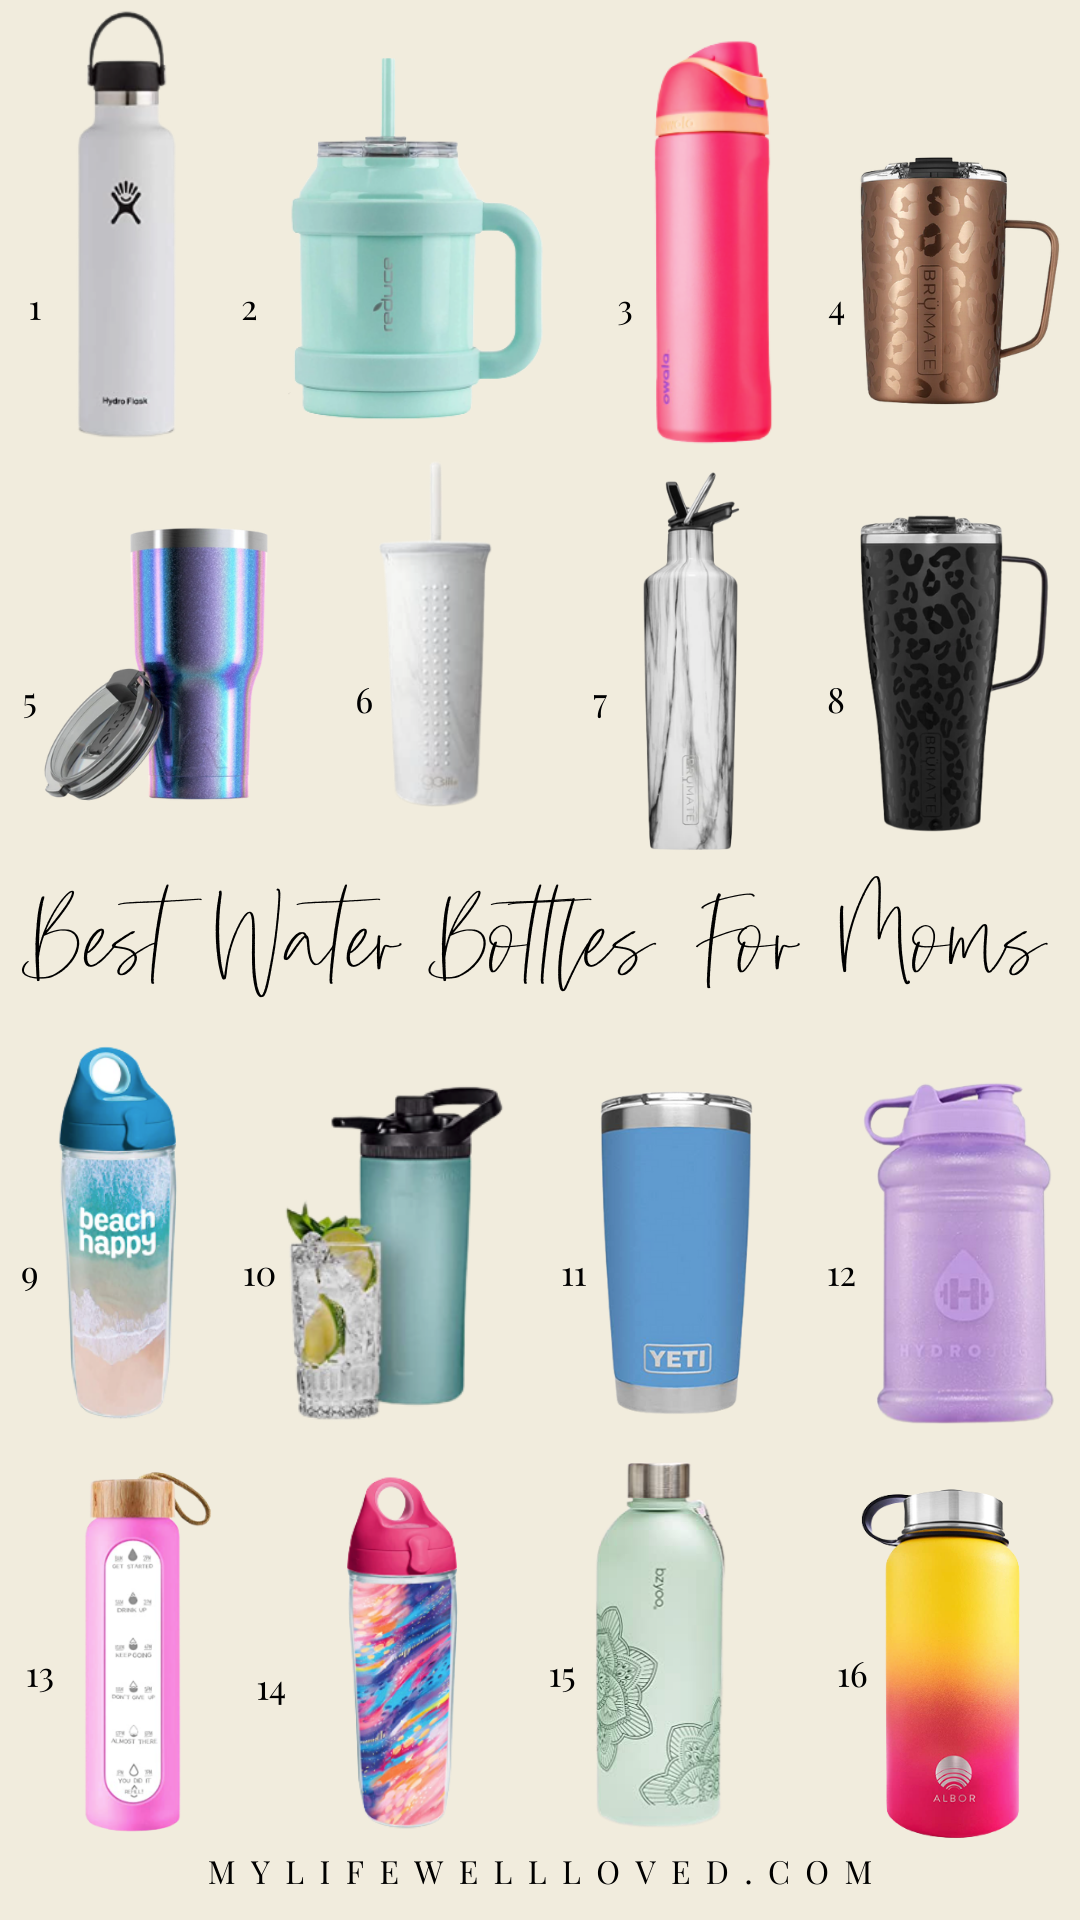 https://www.mylifewellloved.com/wp-content/uploads/Best-Water-Bottles-For-Moms.png